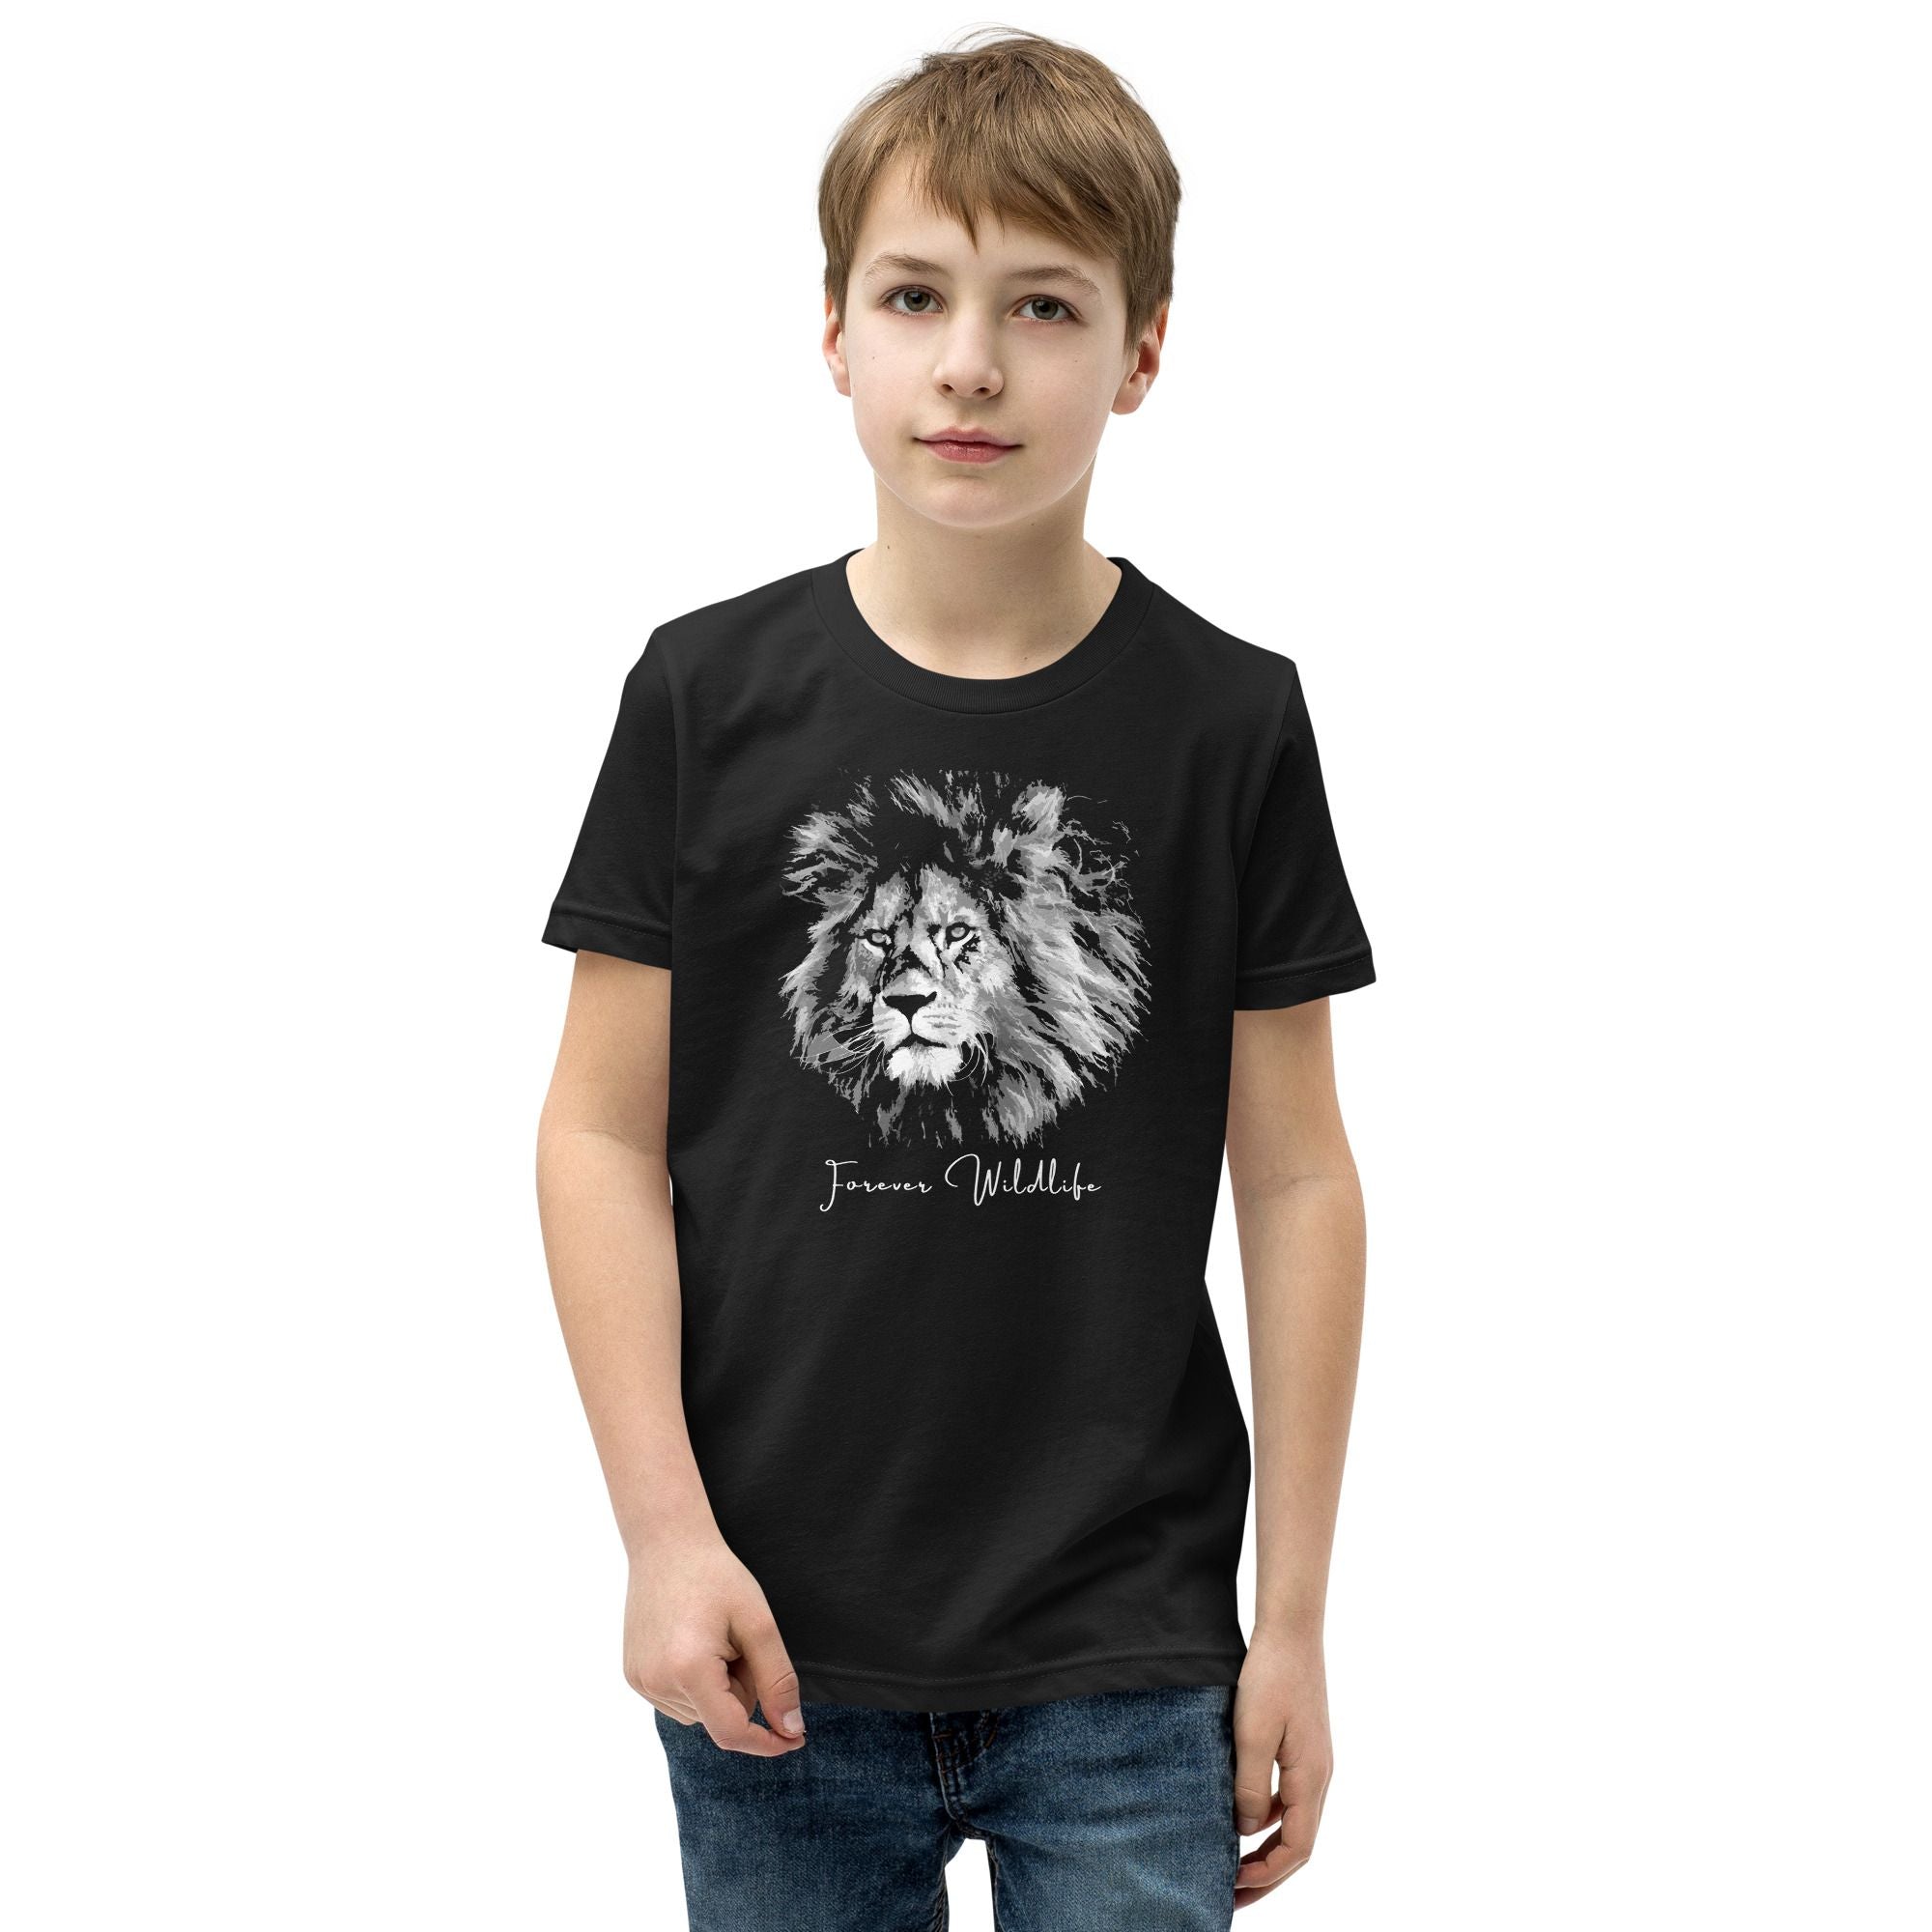 Teen wearing Black Youth T-Shirt with lion graphic as part of Wildlife T Shirts, Wildlife Clothing & Apparel by Forever Wildlife